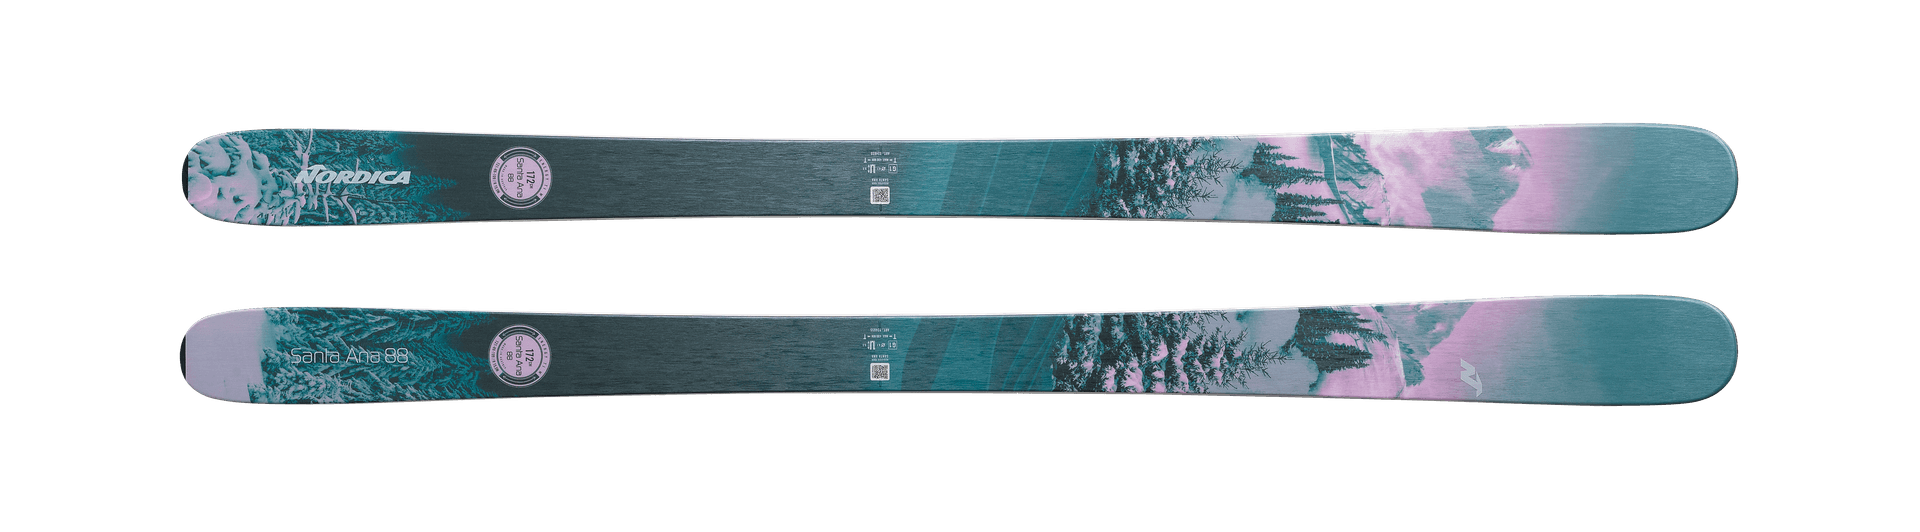 Picture of the Nordica Santa ana 88 skis.